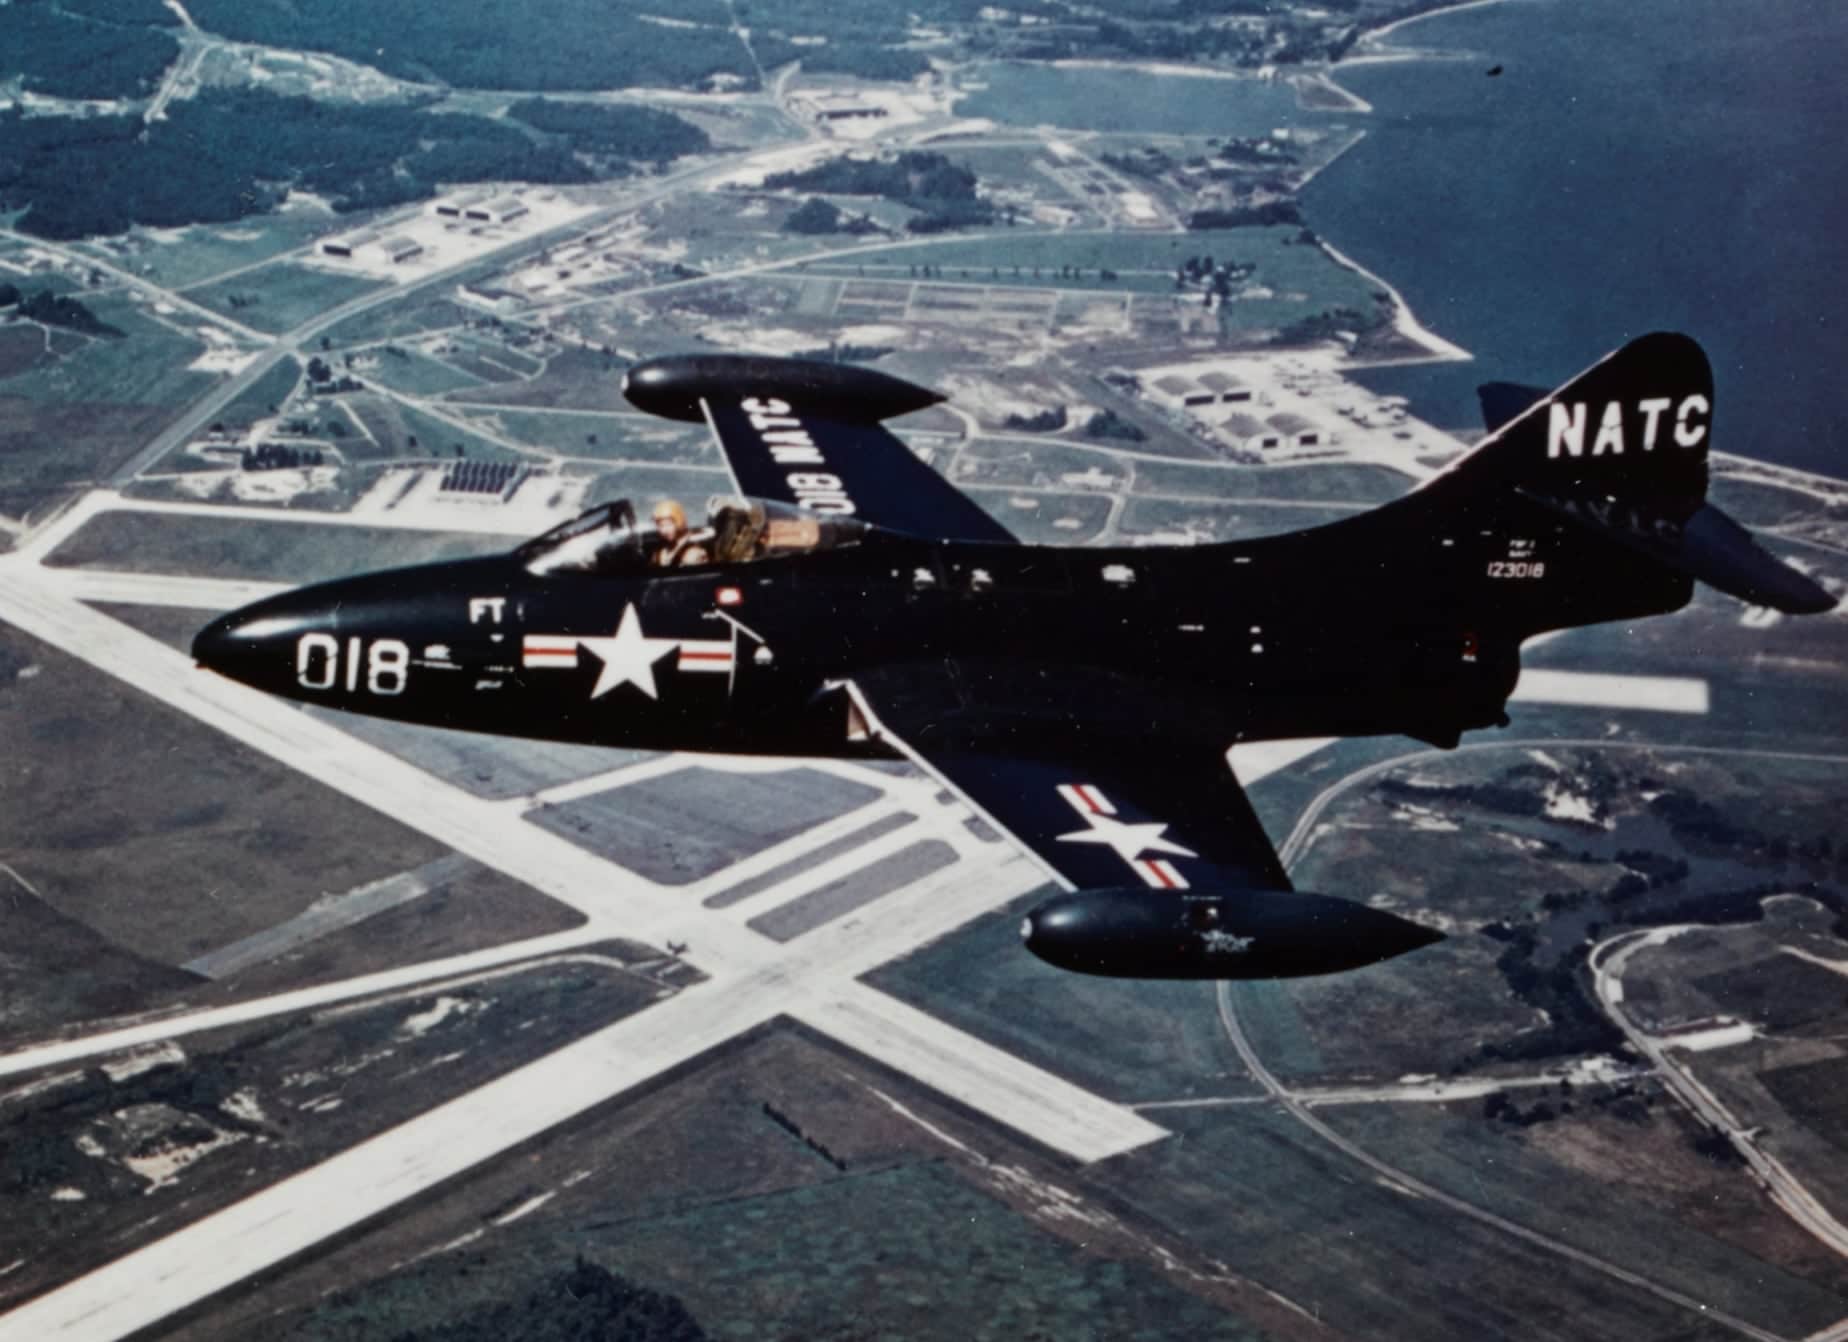 F - 9F - 5 Panther, (NAVY).